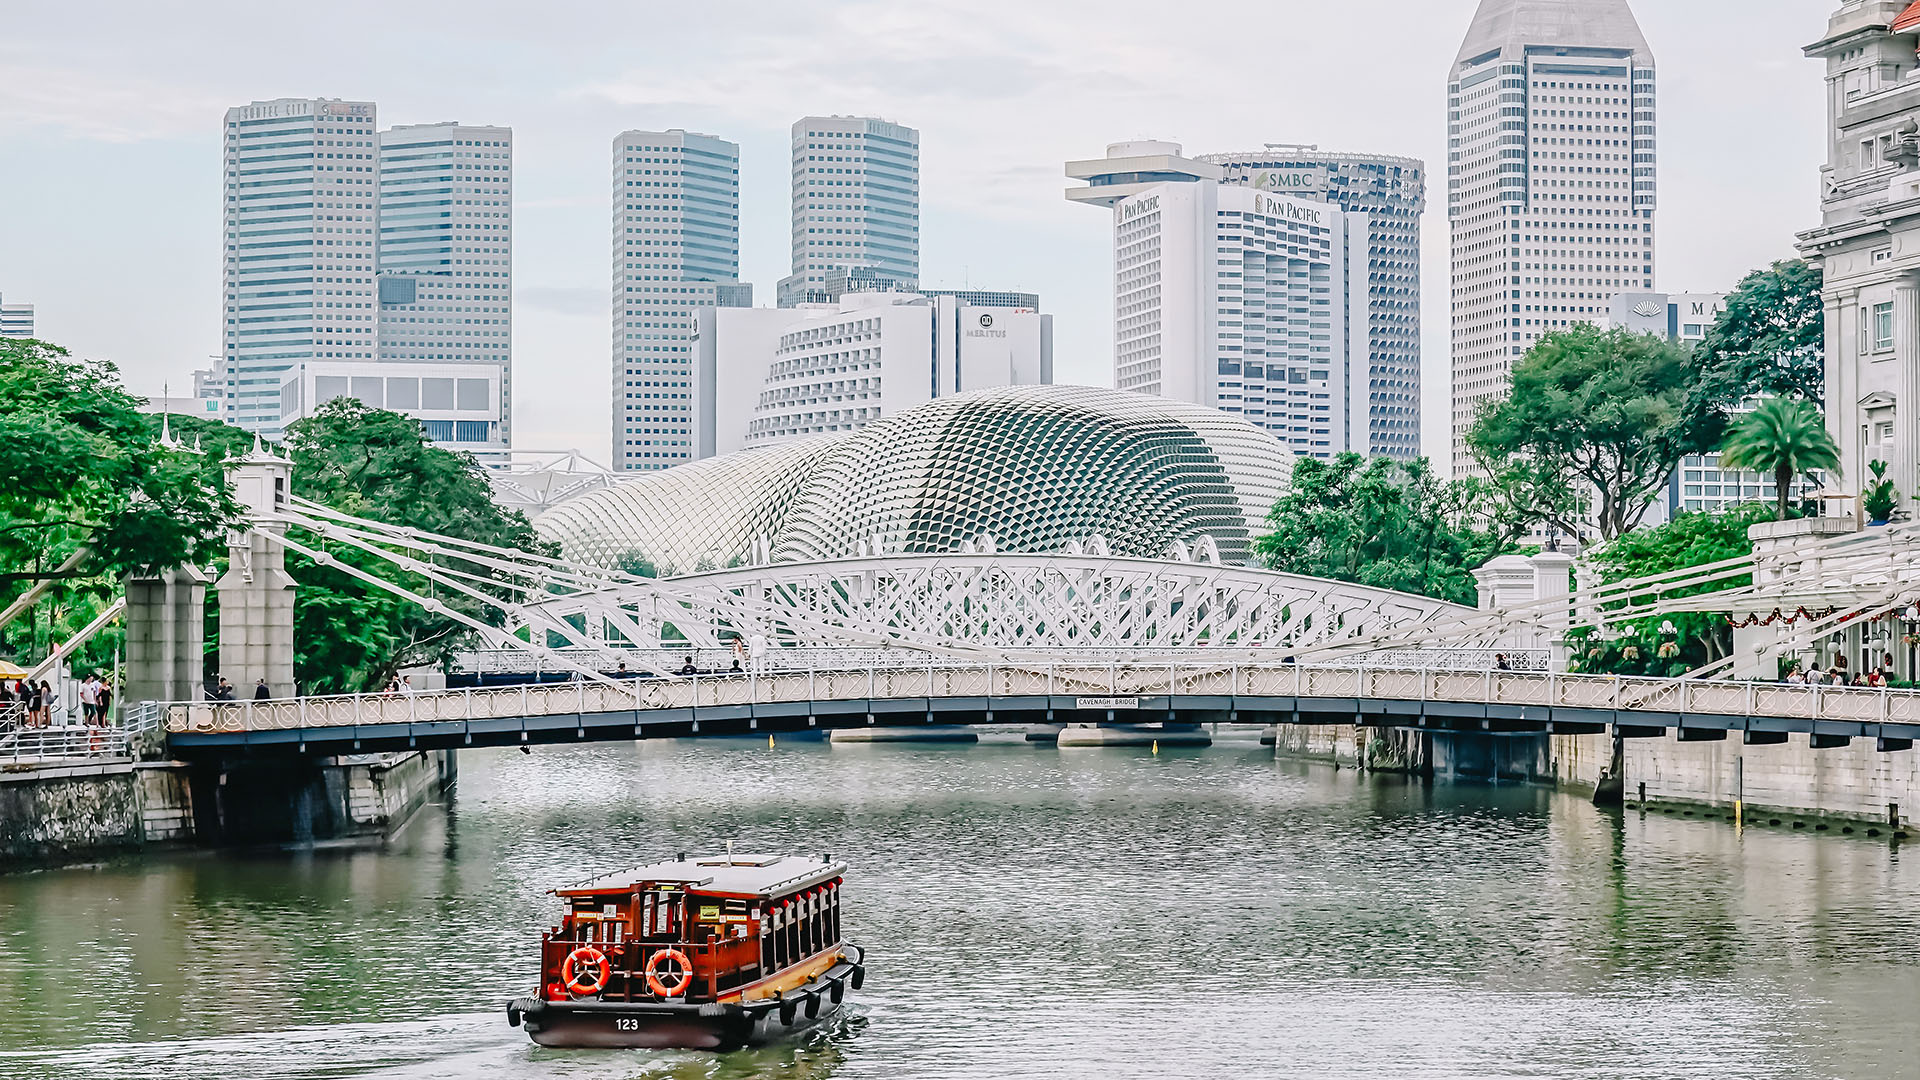 Recent case law developments in Singapore’s restructuring and insolvency laws show balancing between pro-rehabilitation policies and pro-creditor policies